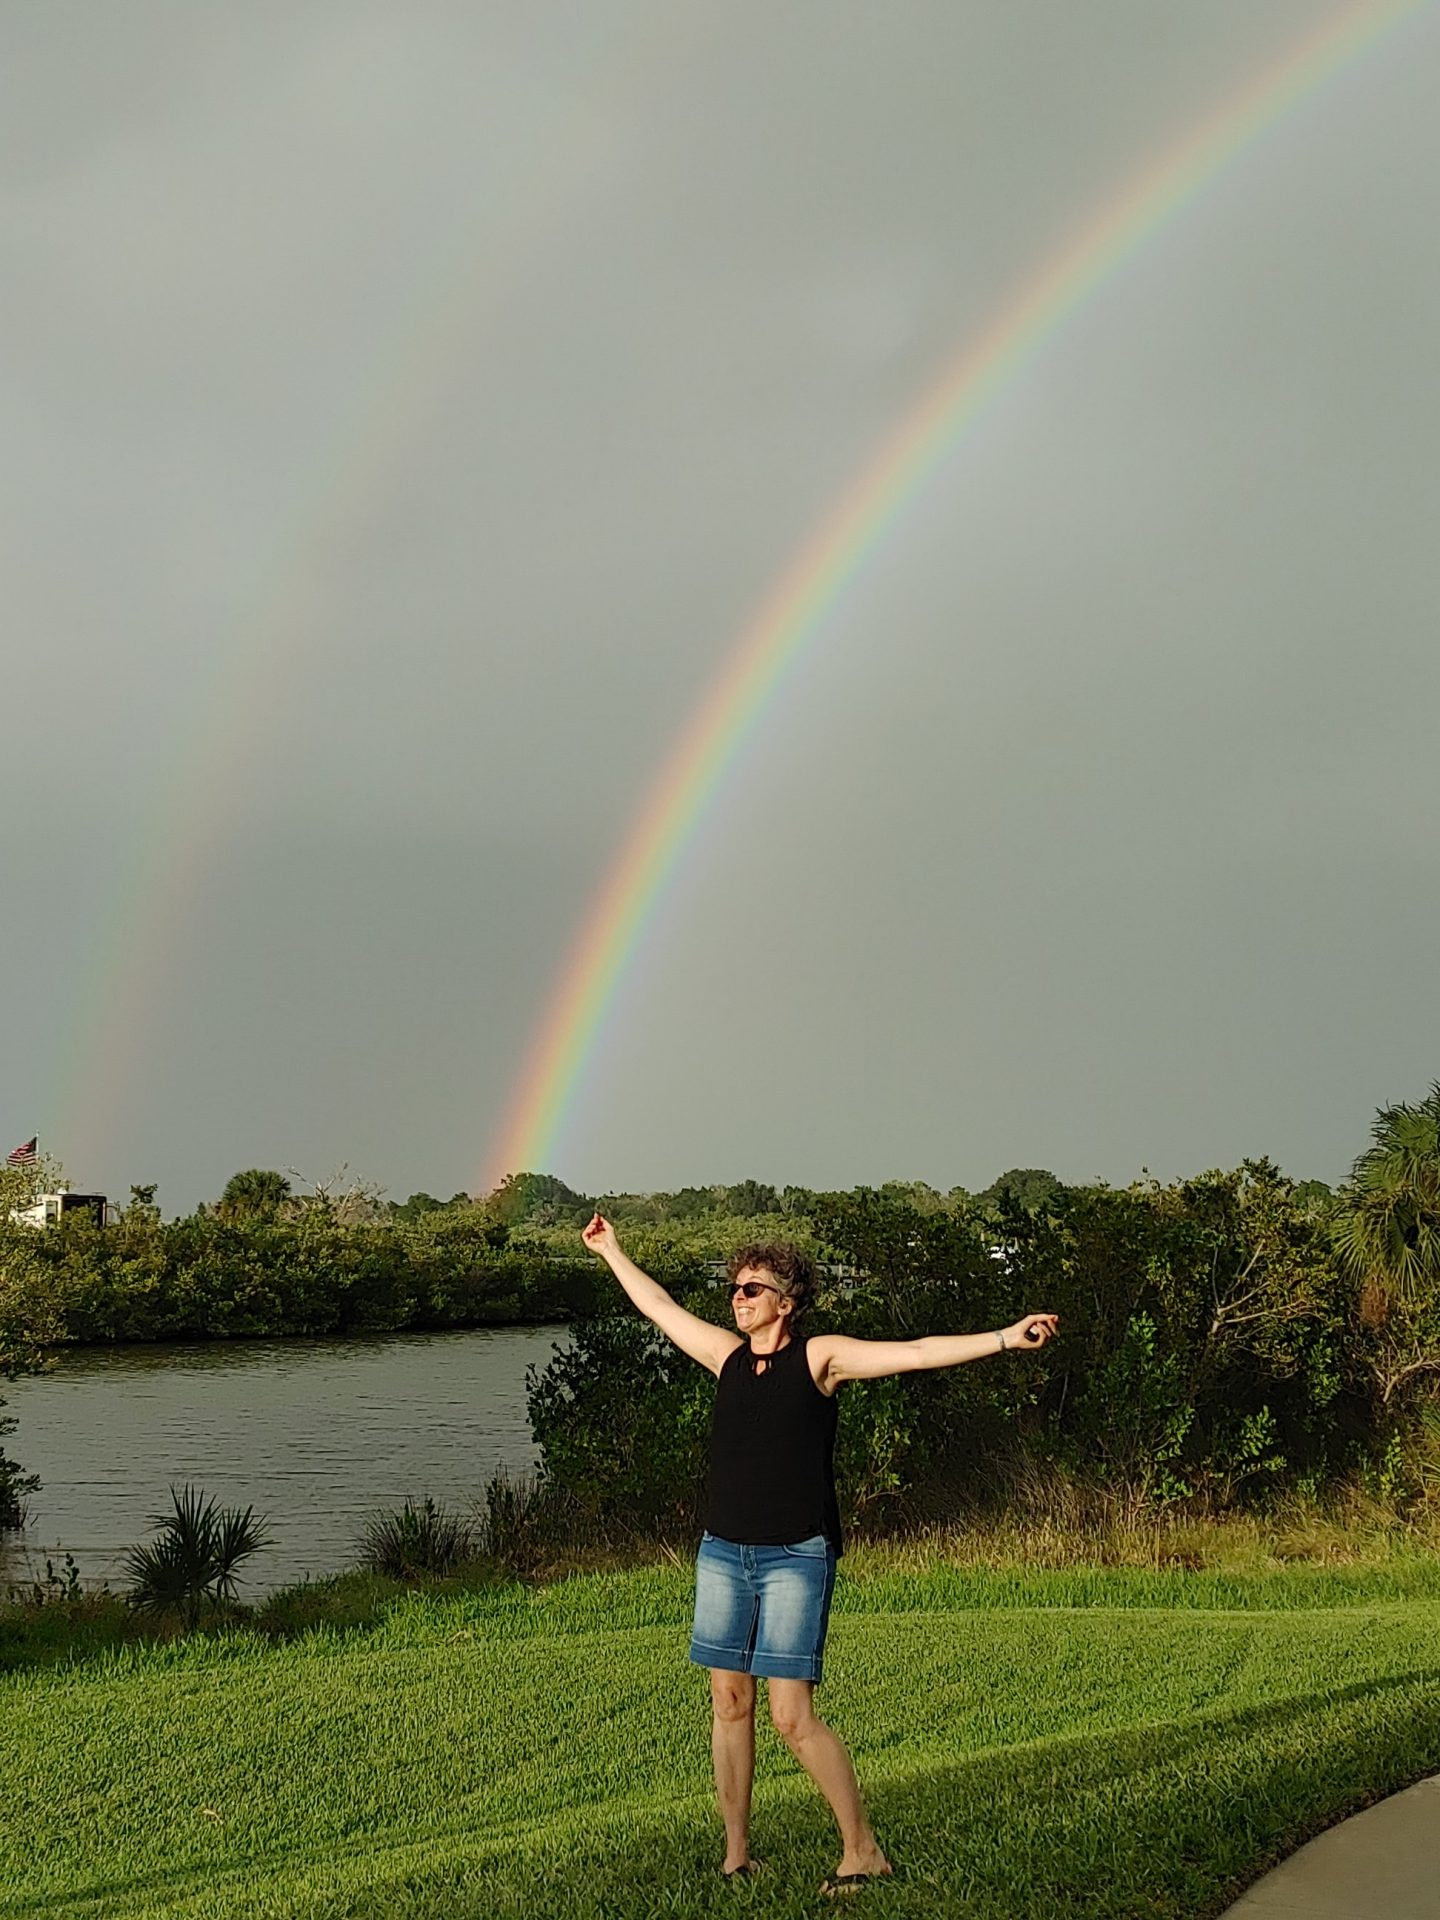 As we were leaving her neighborhood for the last time, mom sent a full double rainbow that stretched completely over the dolphin pier where we sought solace every day over the past few weeks. I don't believe in coincidences. I believe in God and everlasting life.